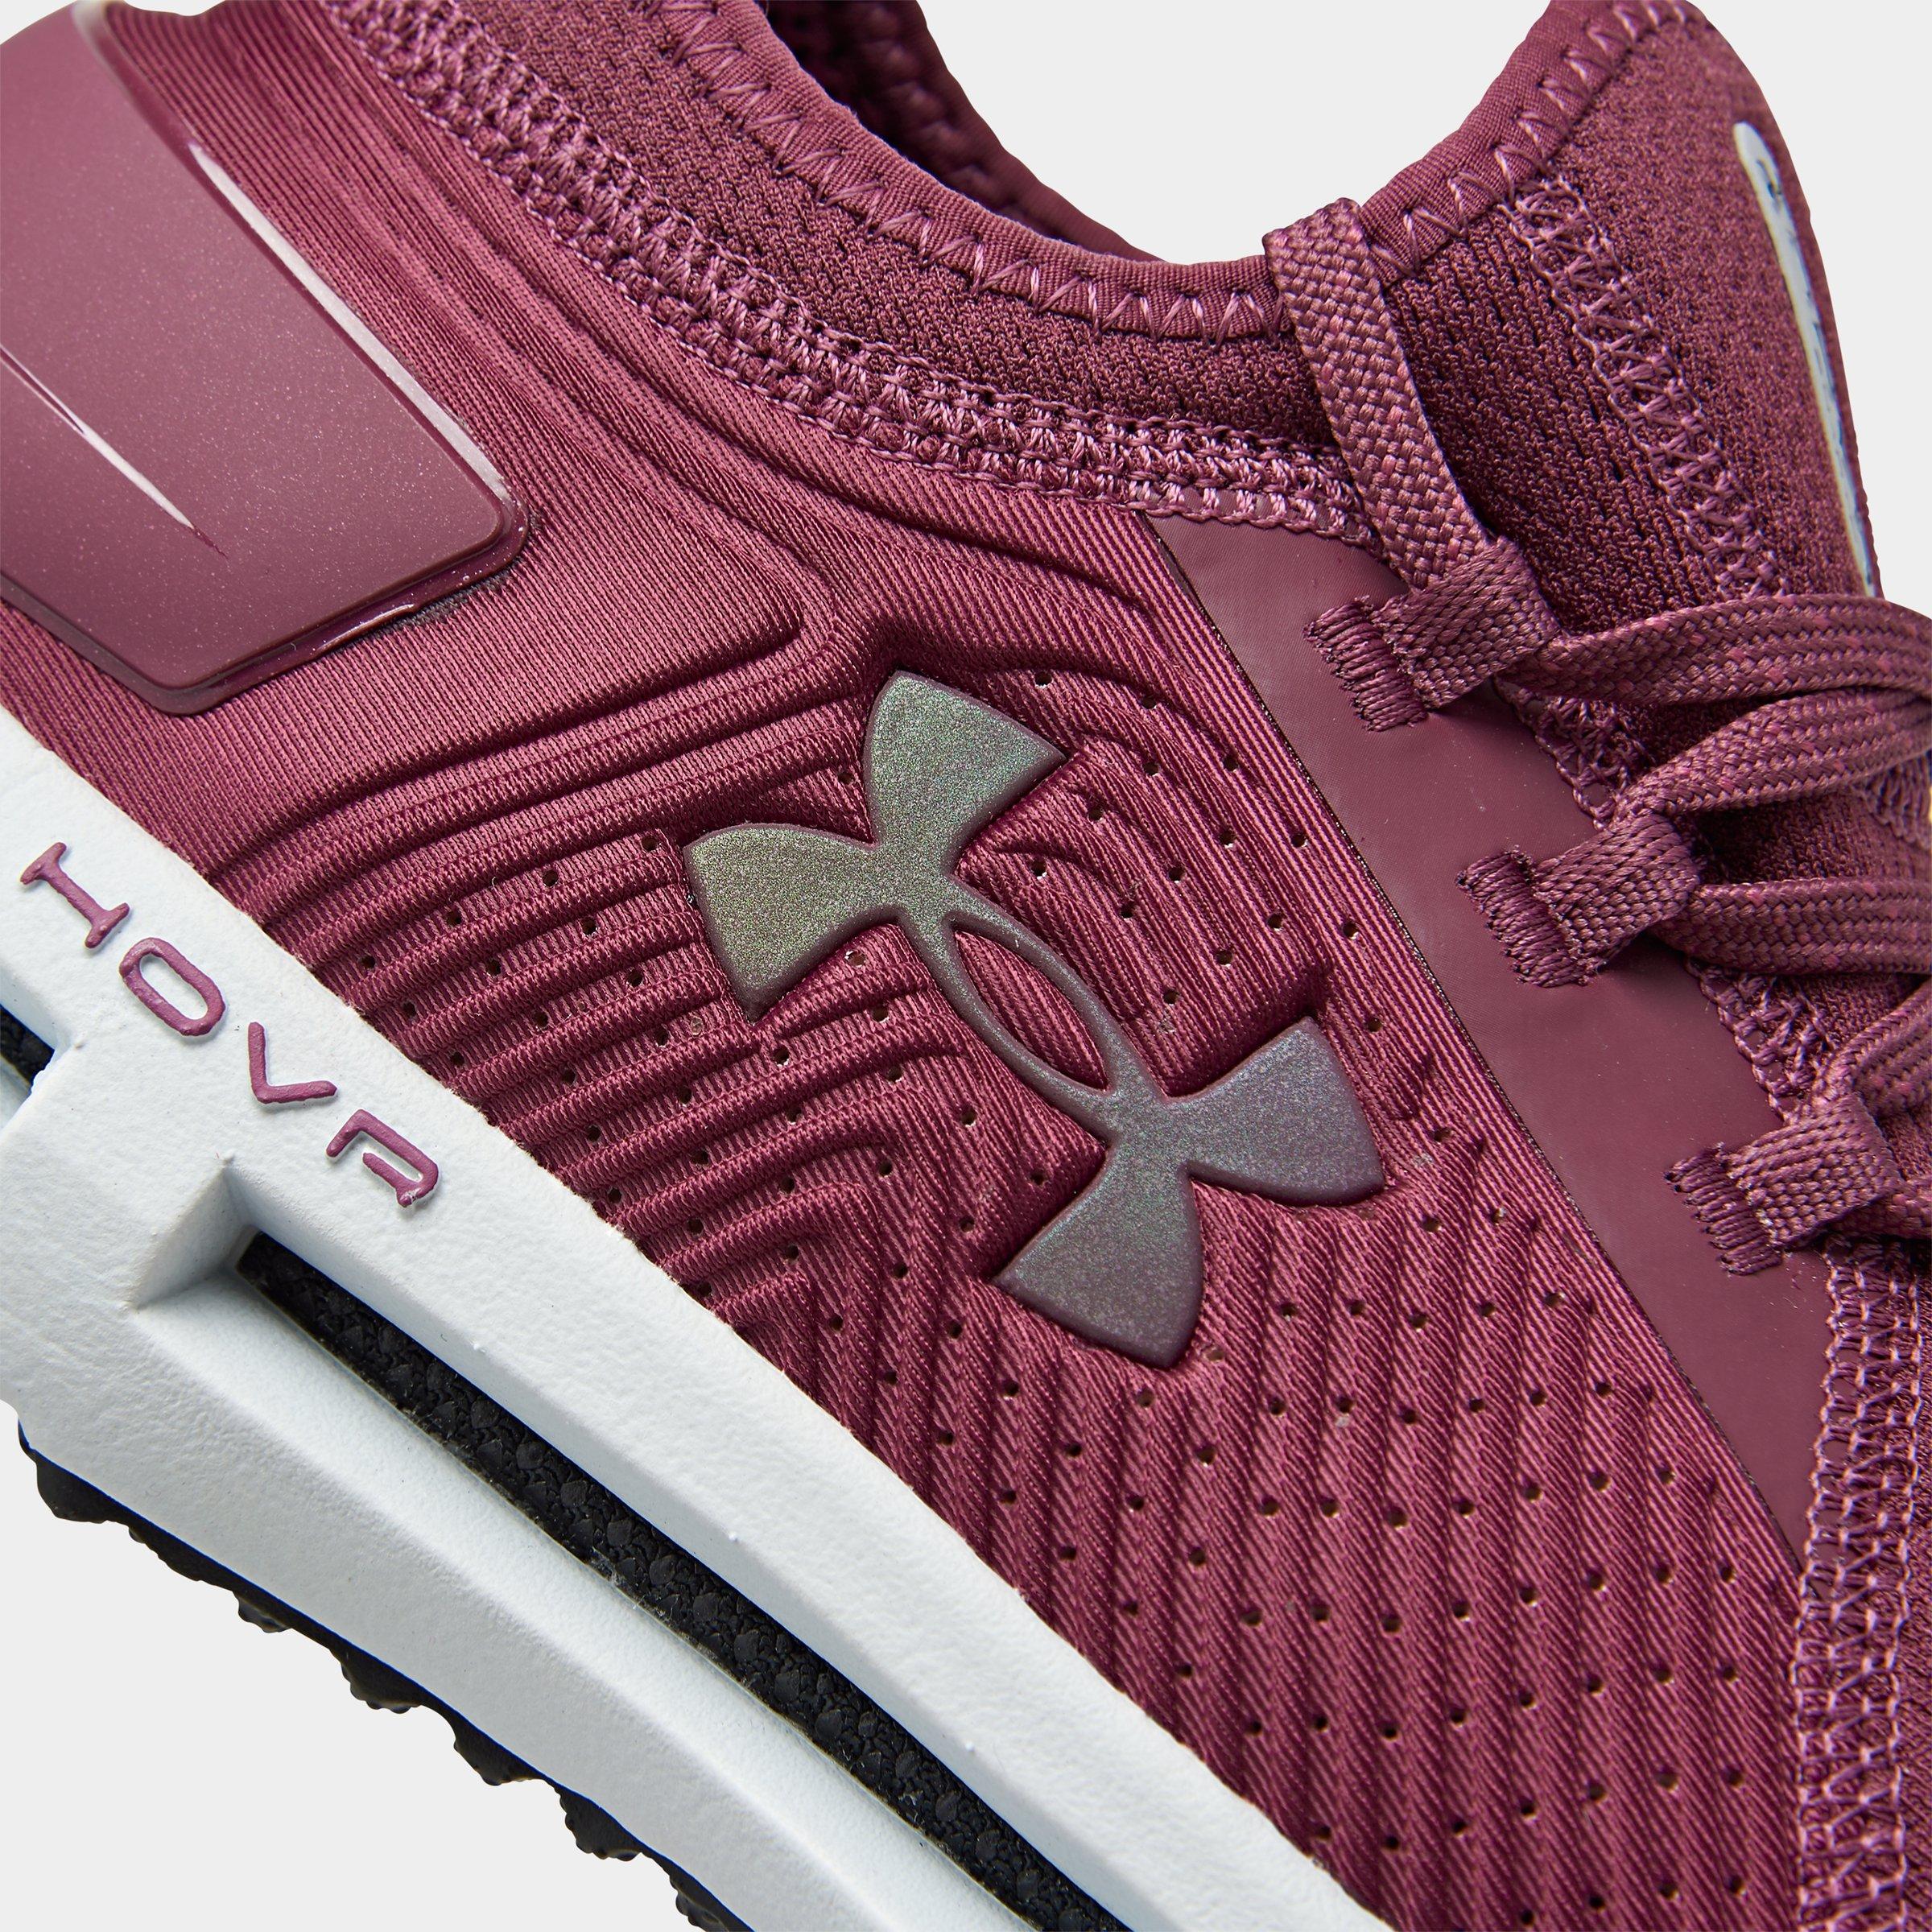 womens under armour hovr shoes